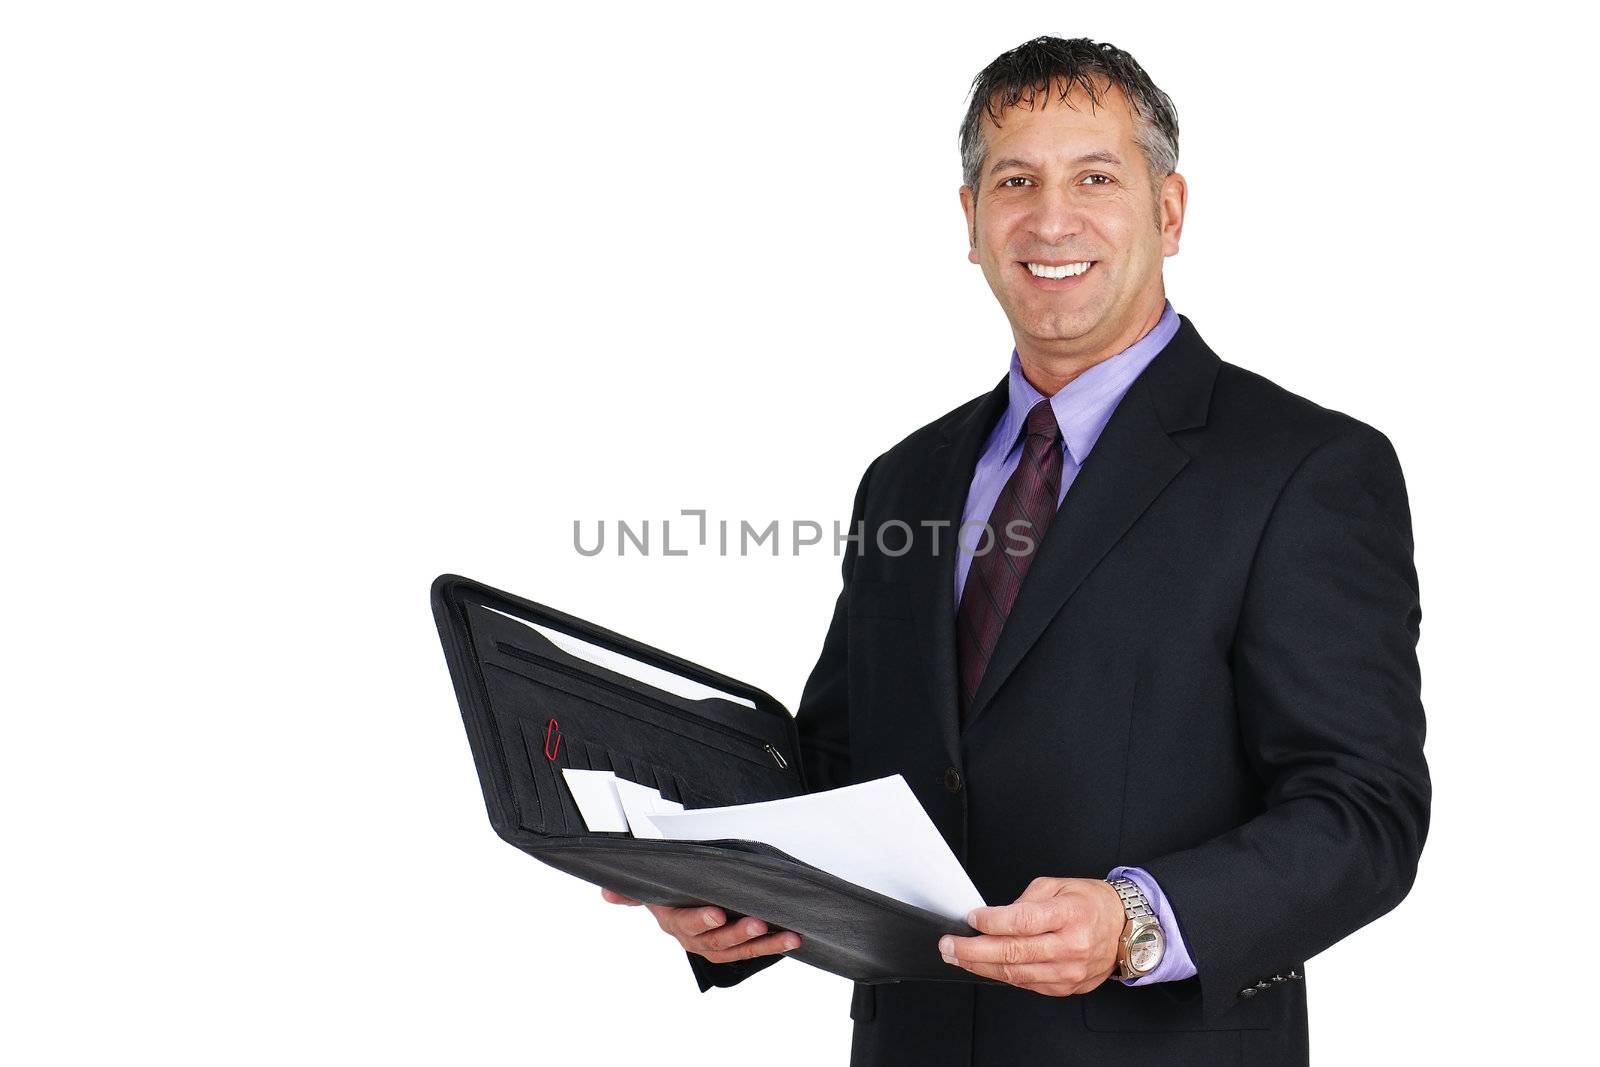 Man in suit and tie, holding paperwork and smiling, can be boss or management employee.